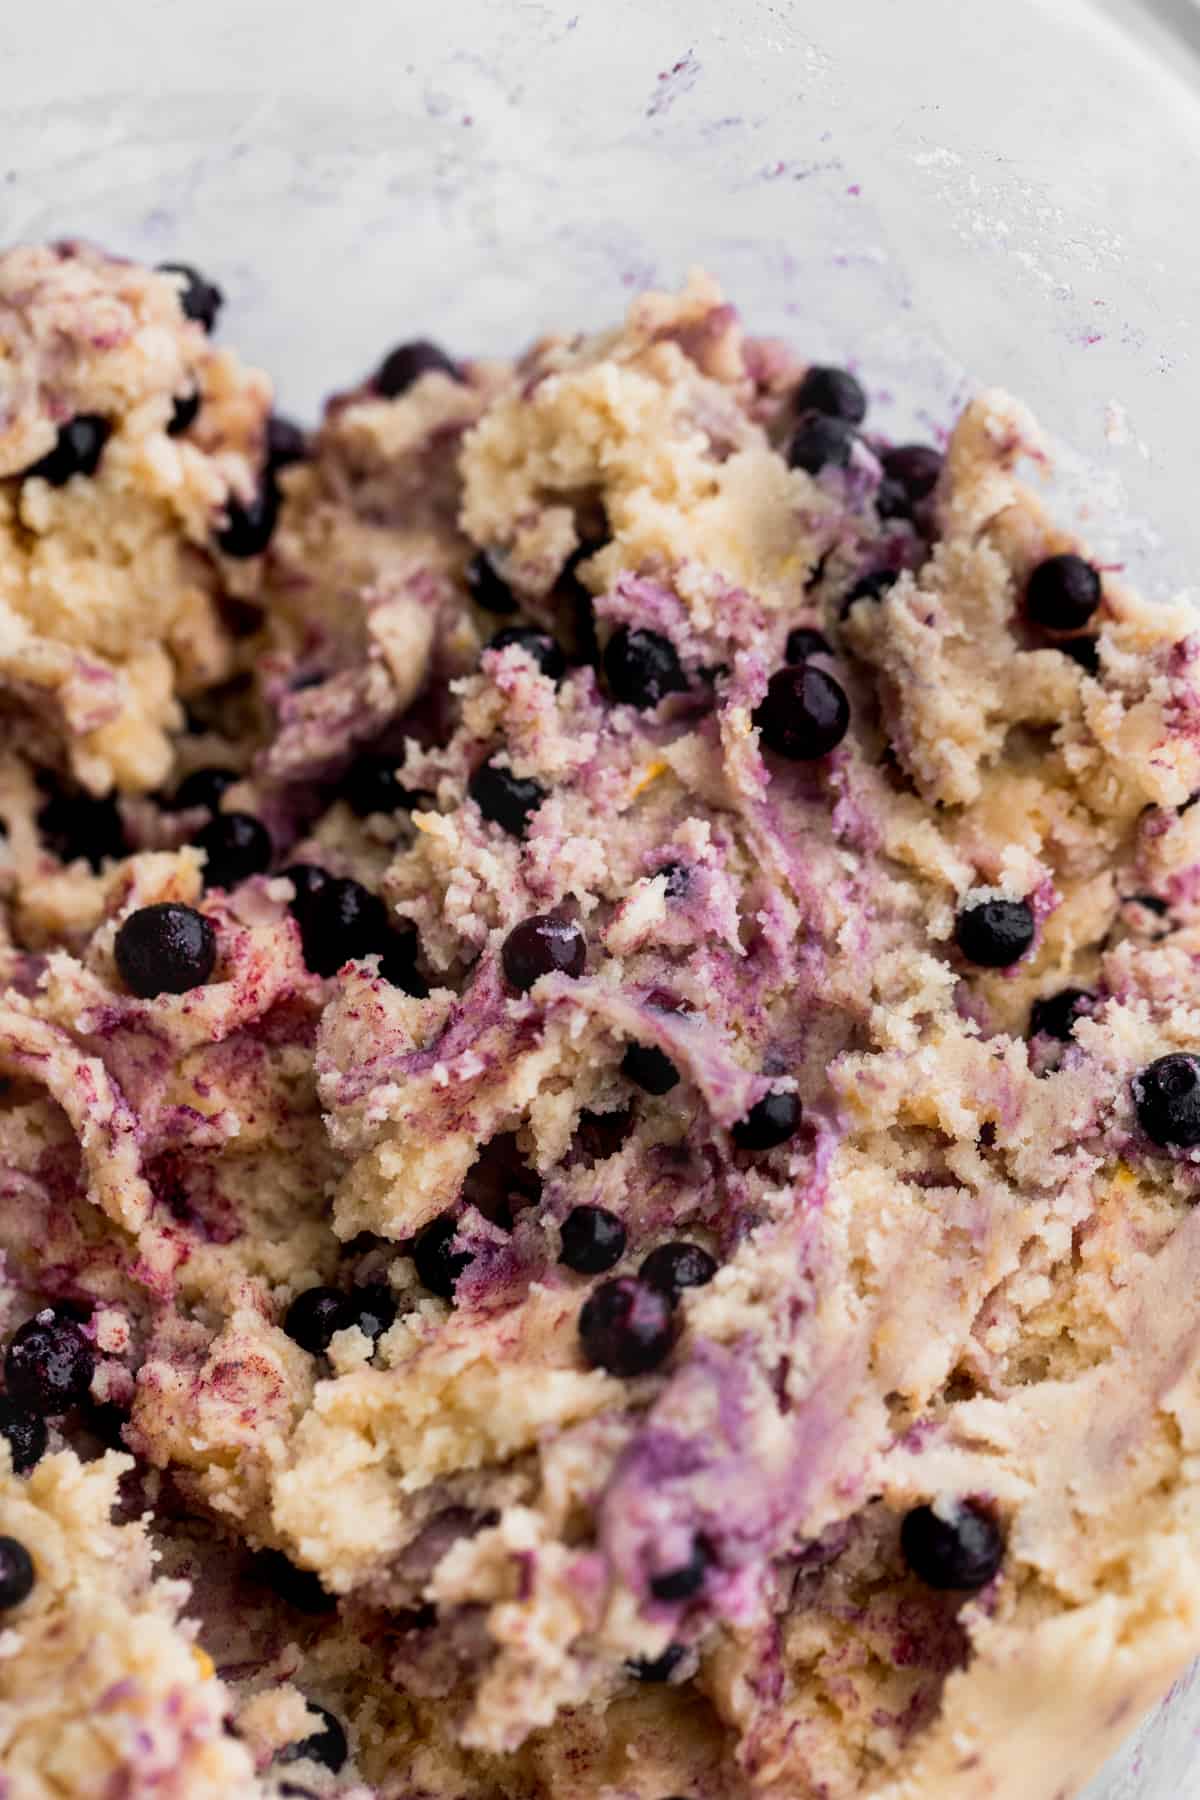 Blueberries swirled into cookie dough in a glass bowl.